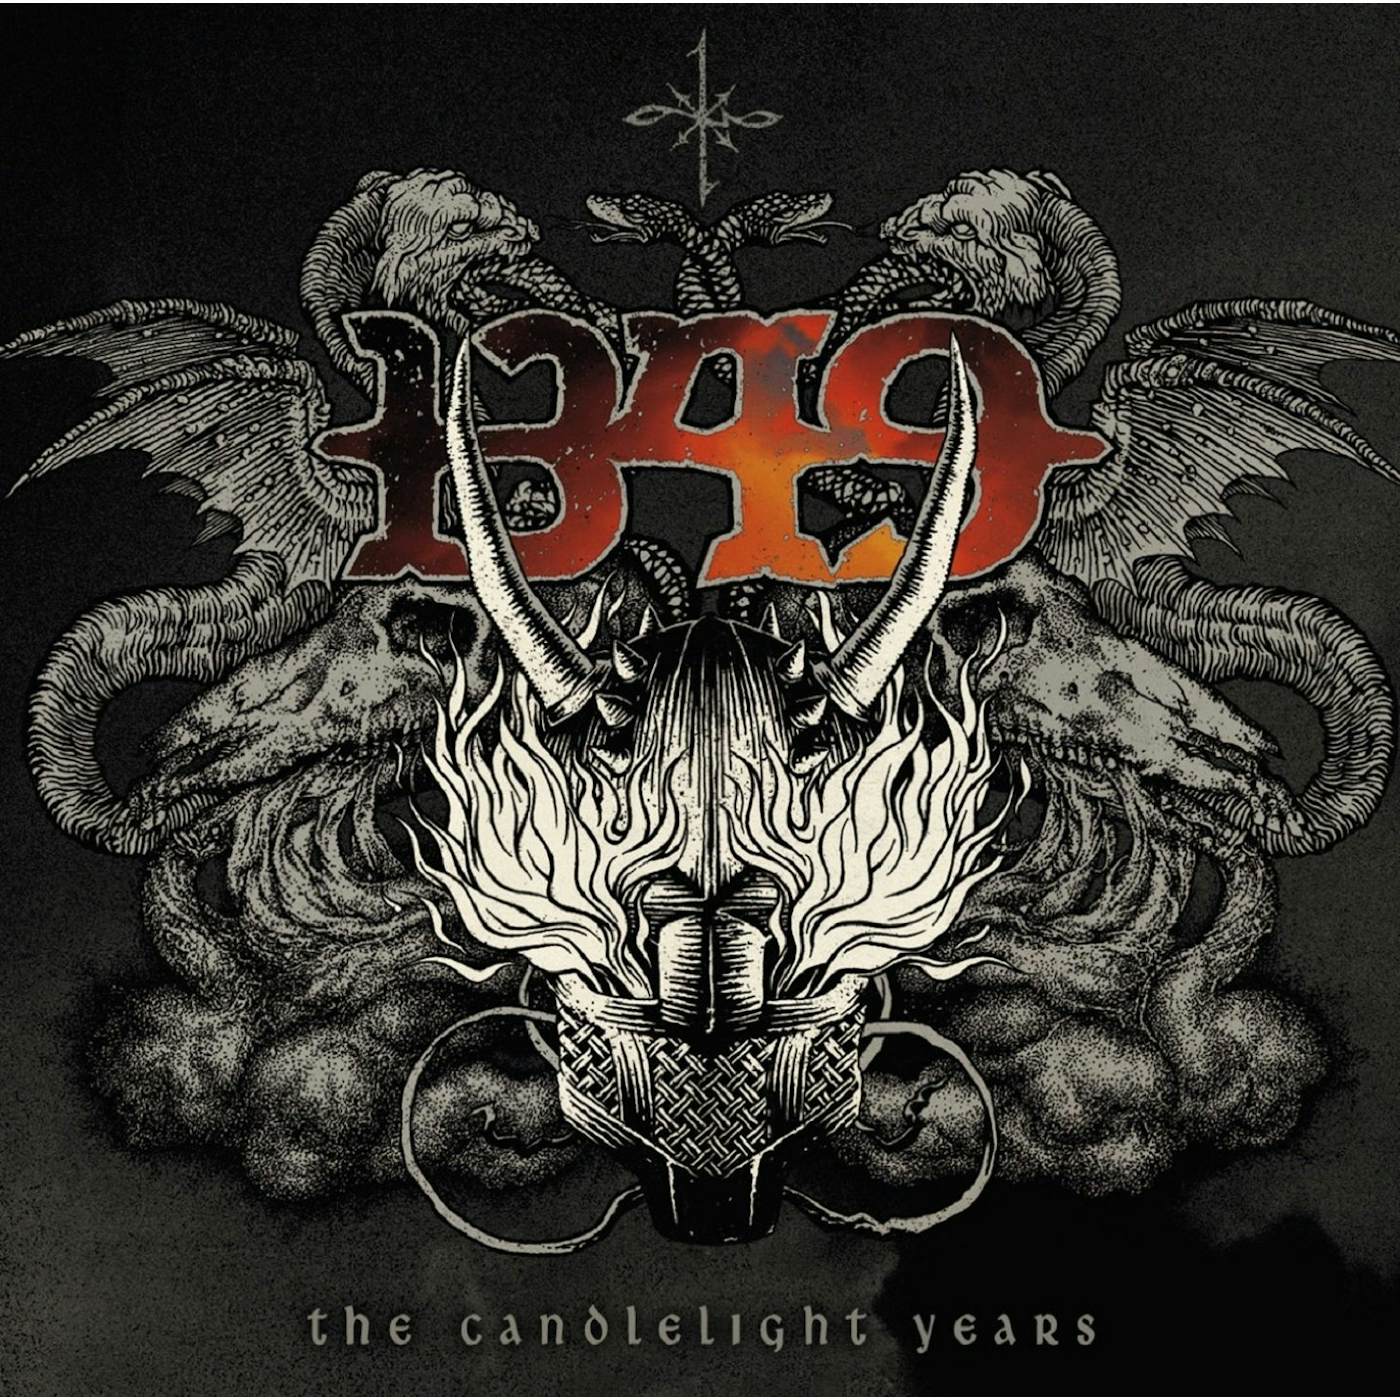 1349 CANDLELIGHT YEARS CD